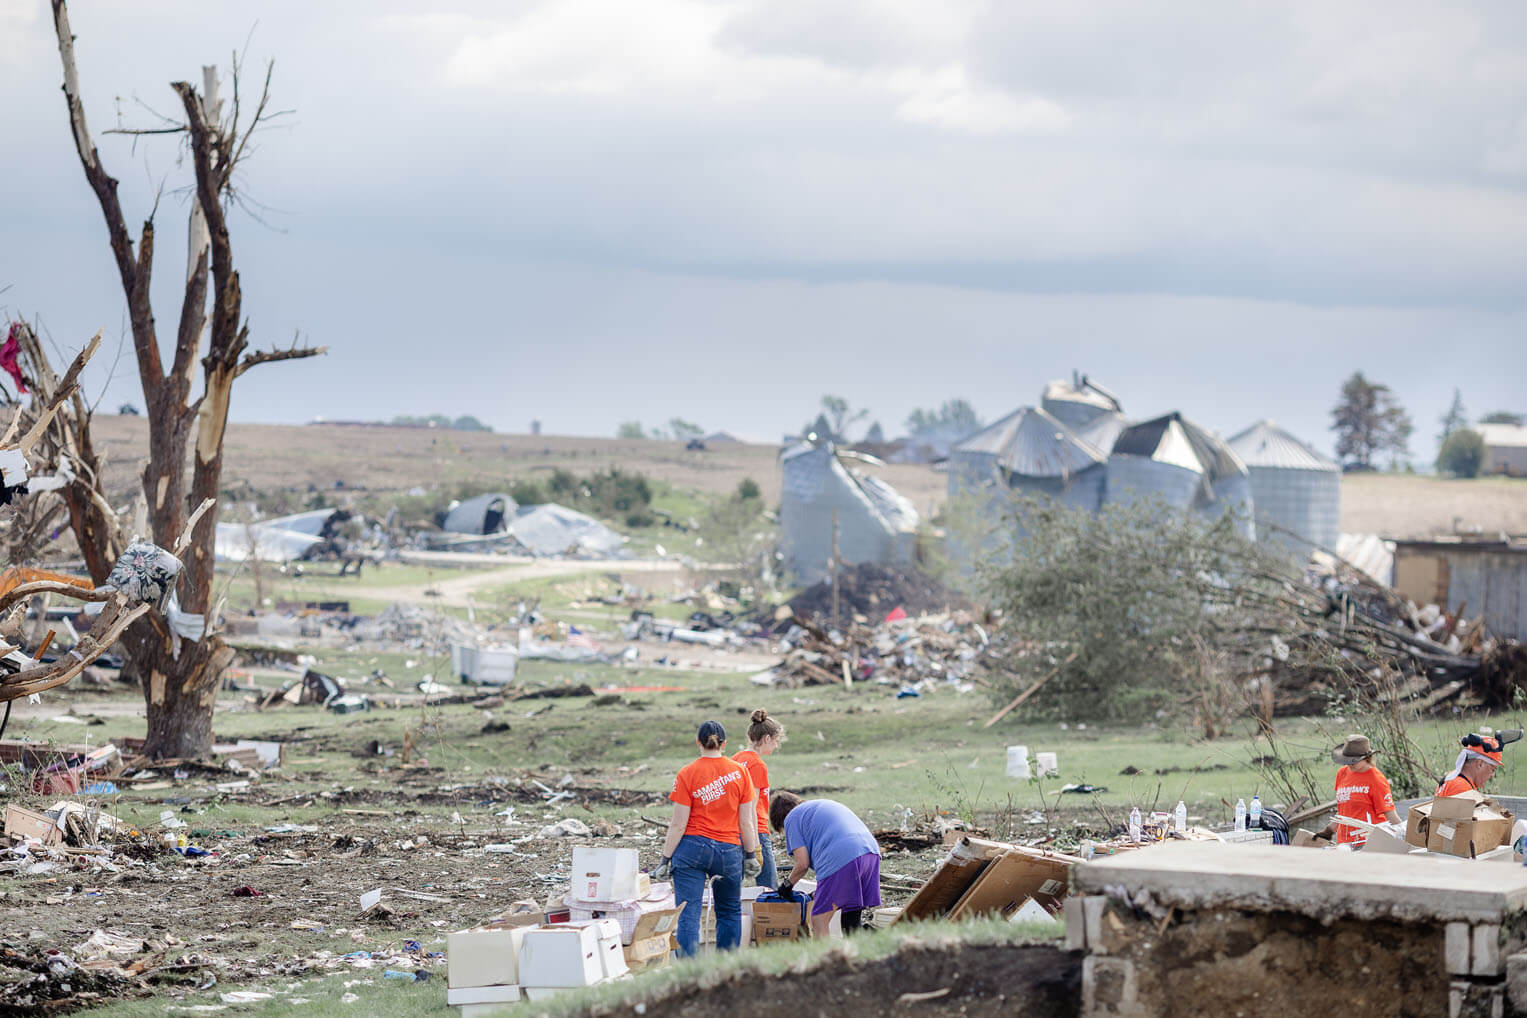 Storms devastated the small Iowa town on May 21.